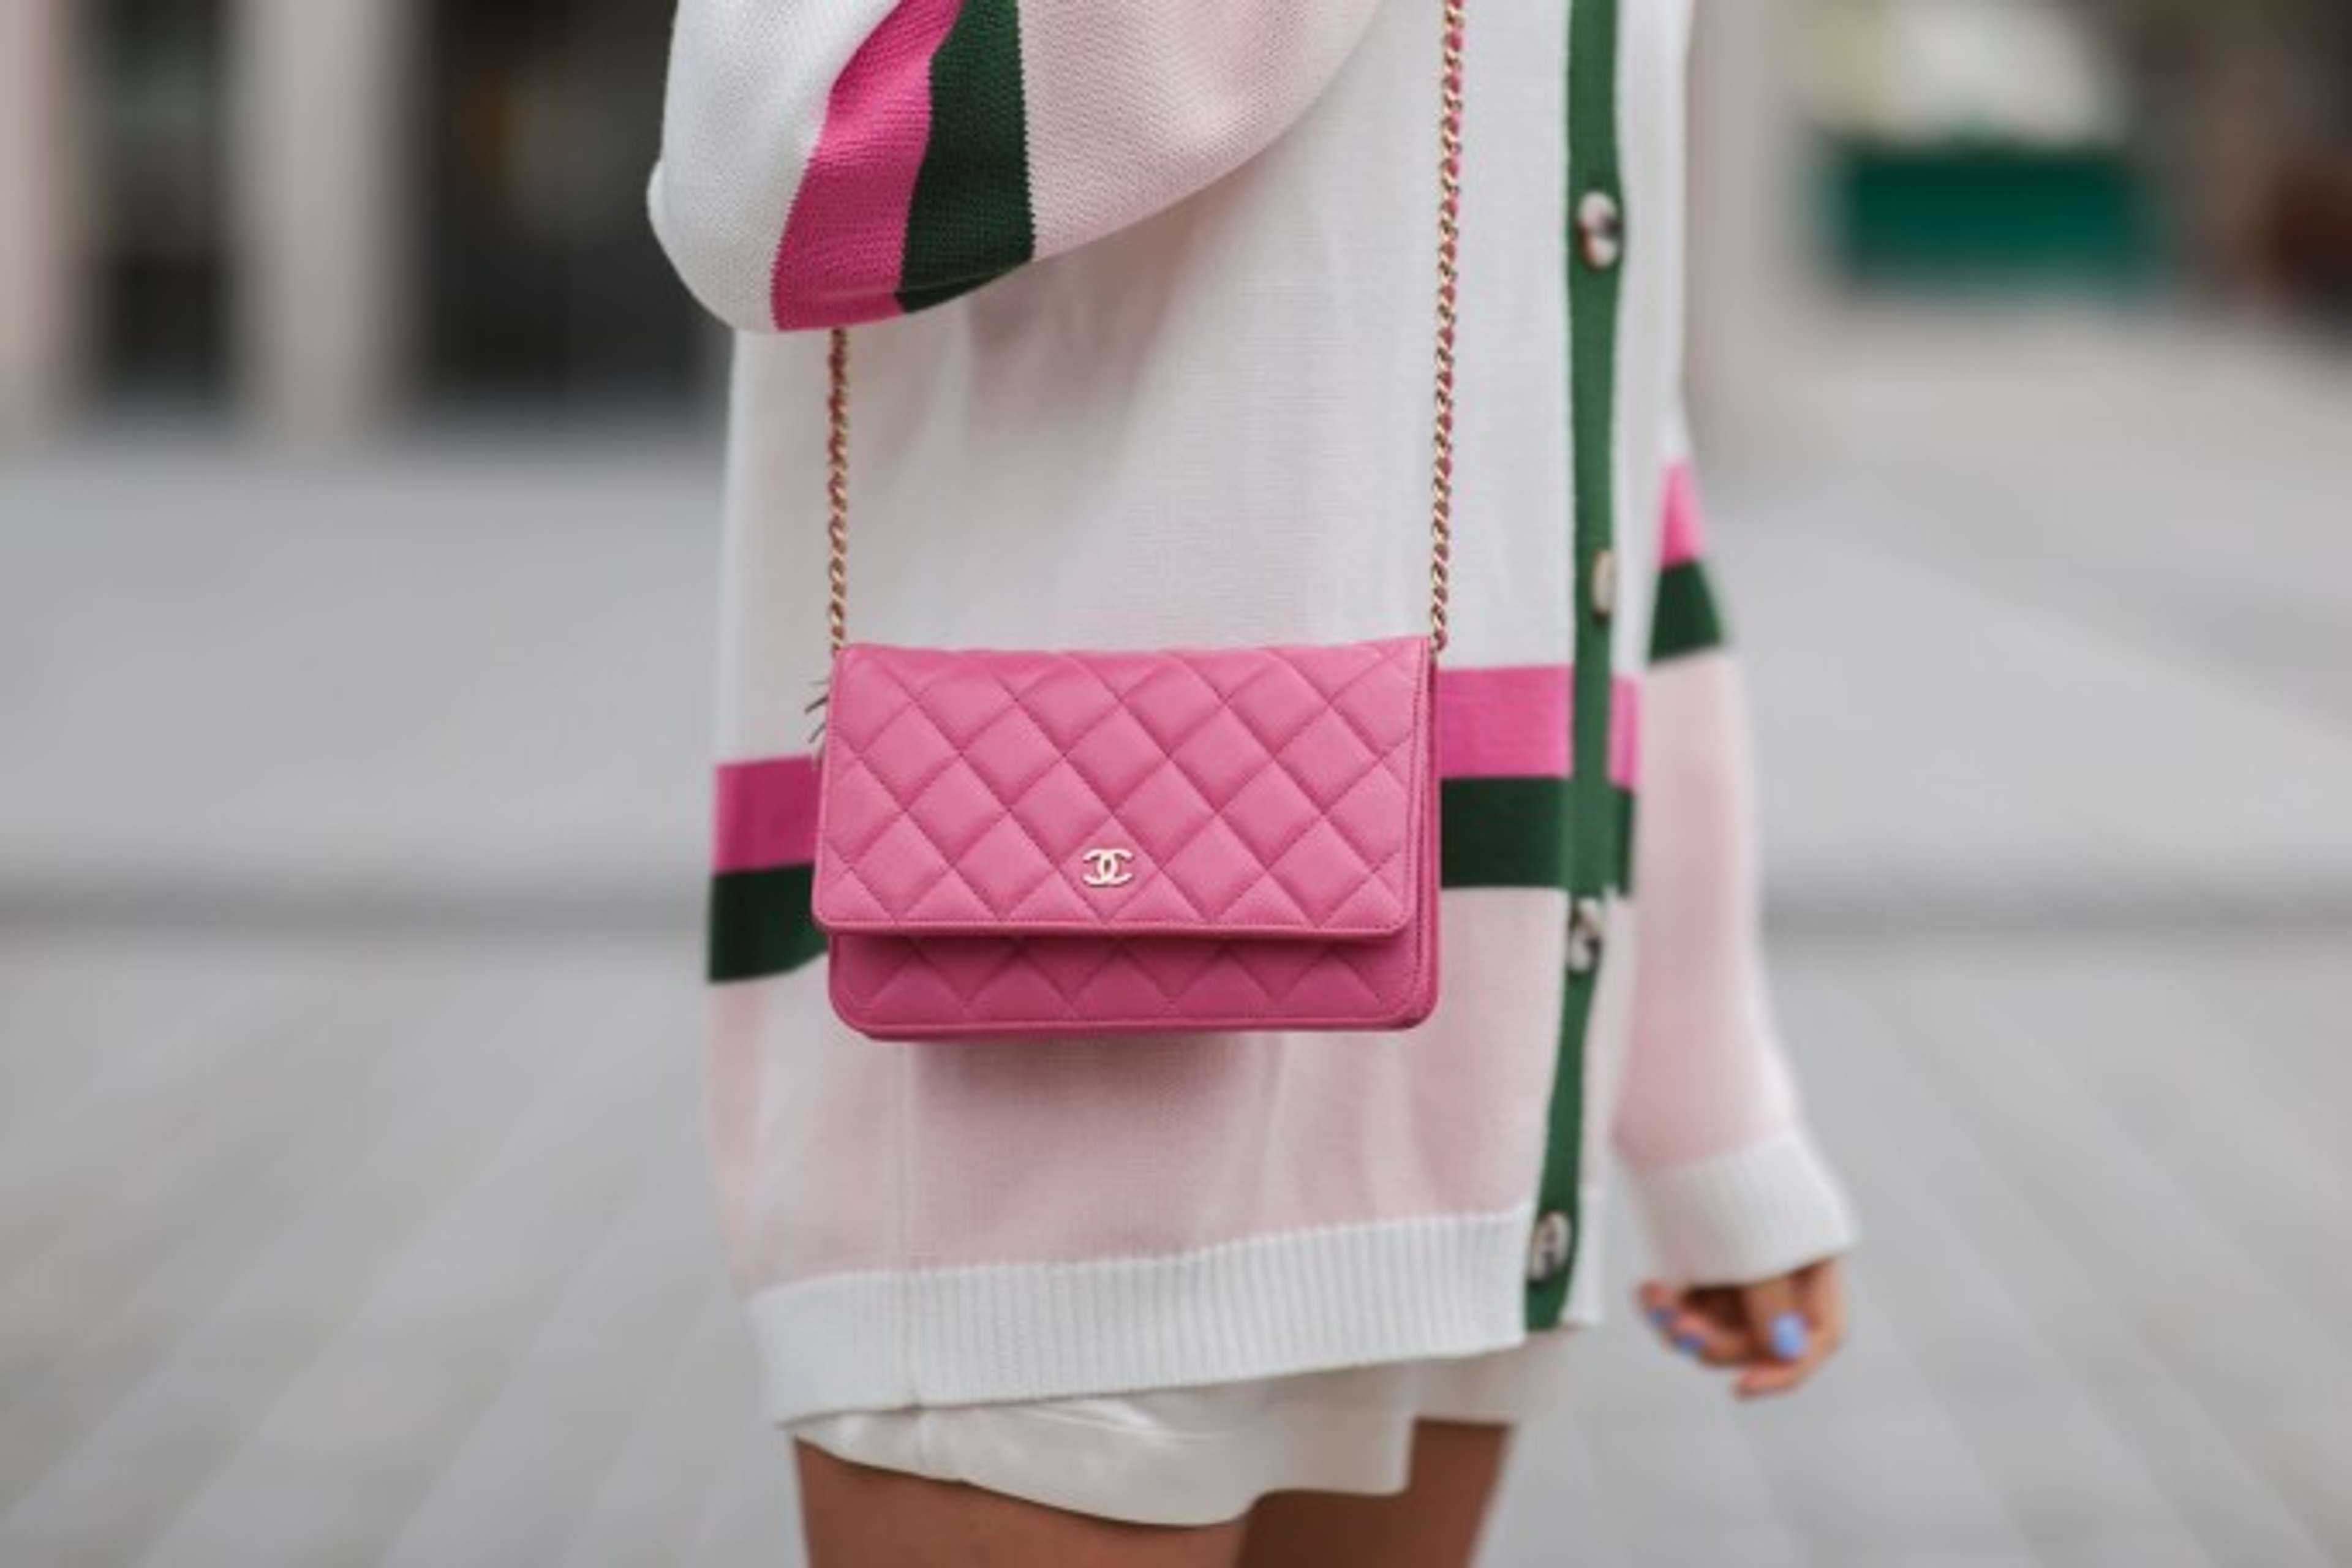 An image of a model wearing a bright pink Chanel Wallet On Chain.